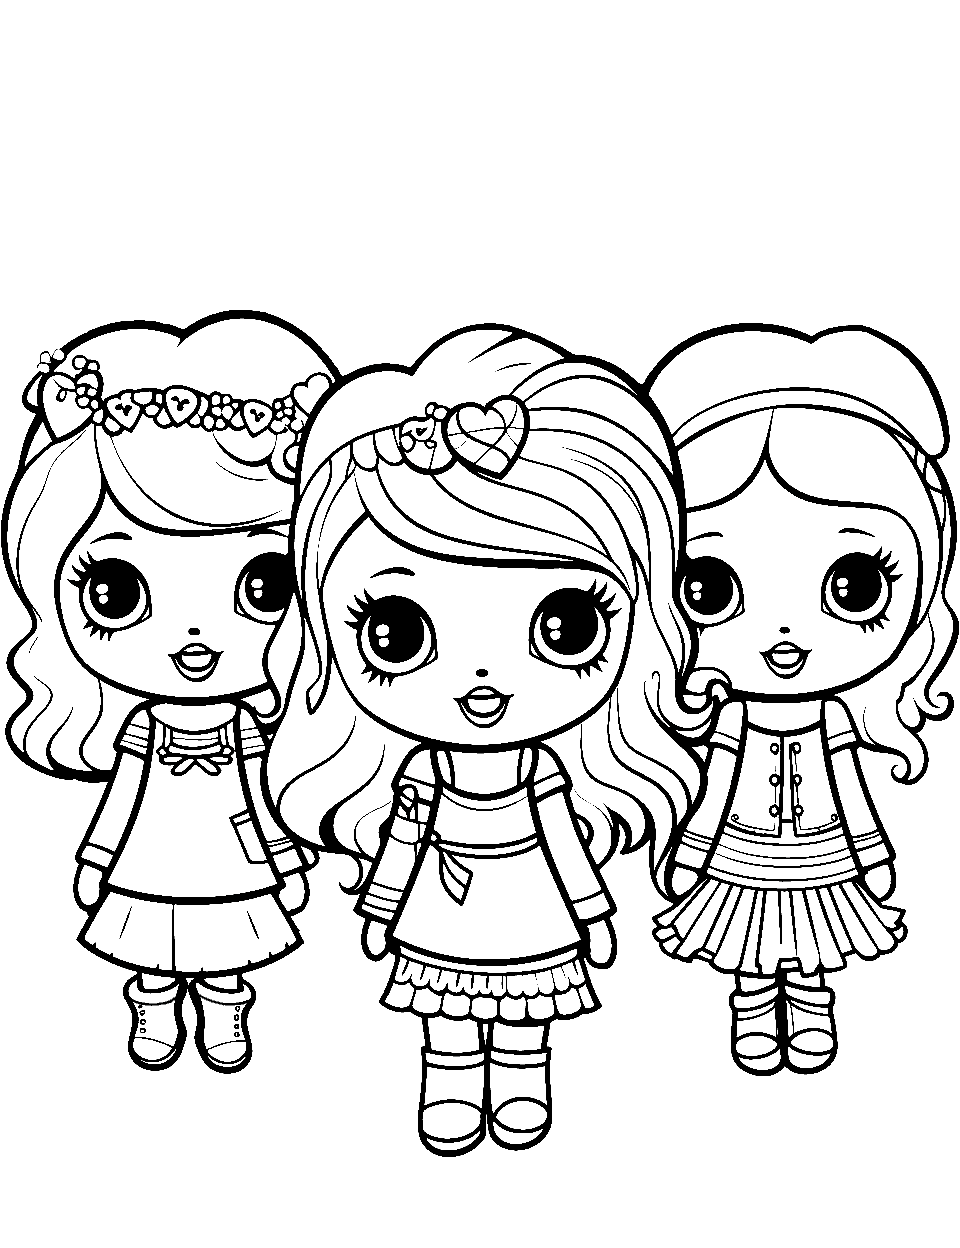 Fashionista Runway Coloring Page - Shopkins dressed in chic outfits ready for the runway.